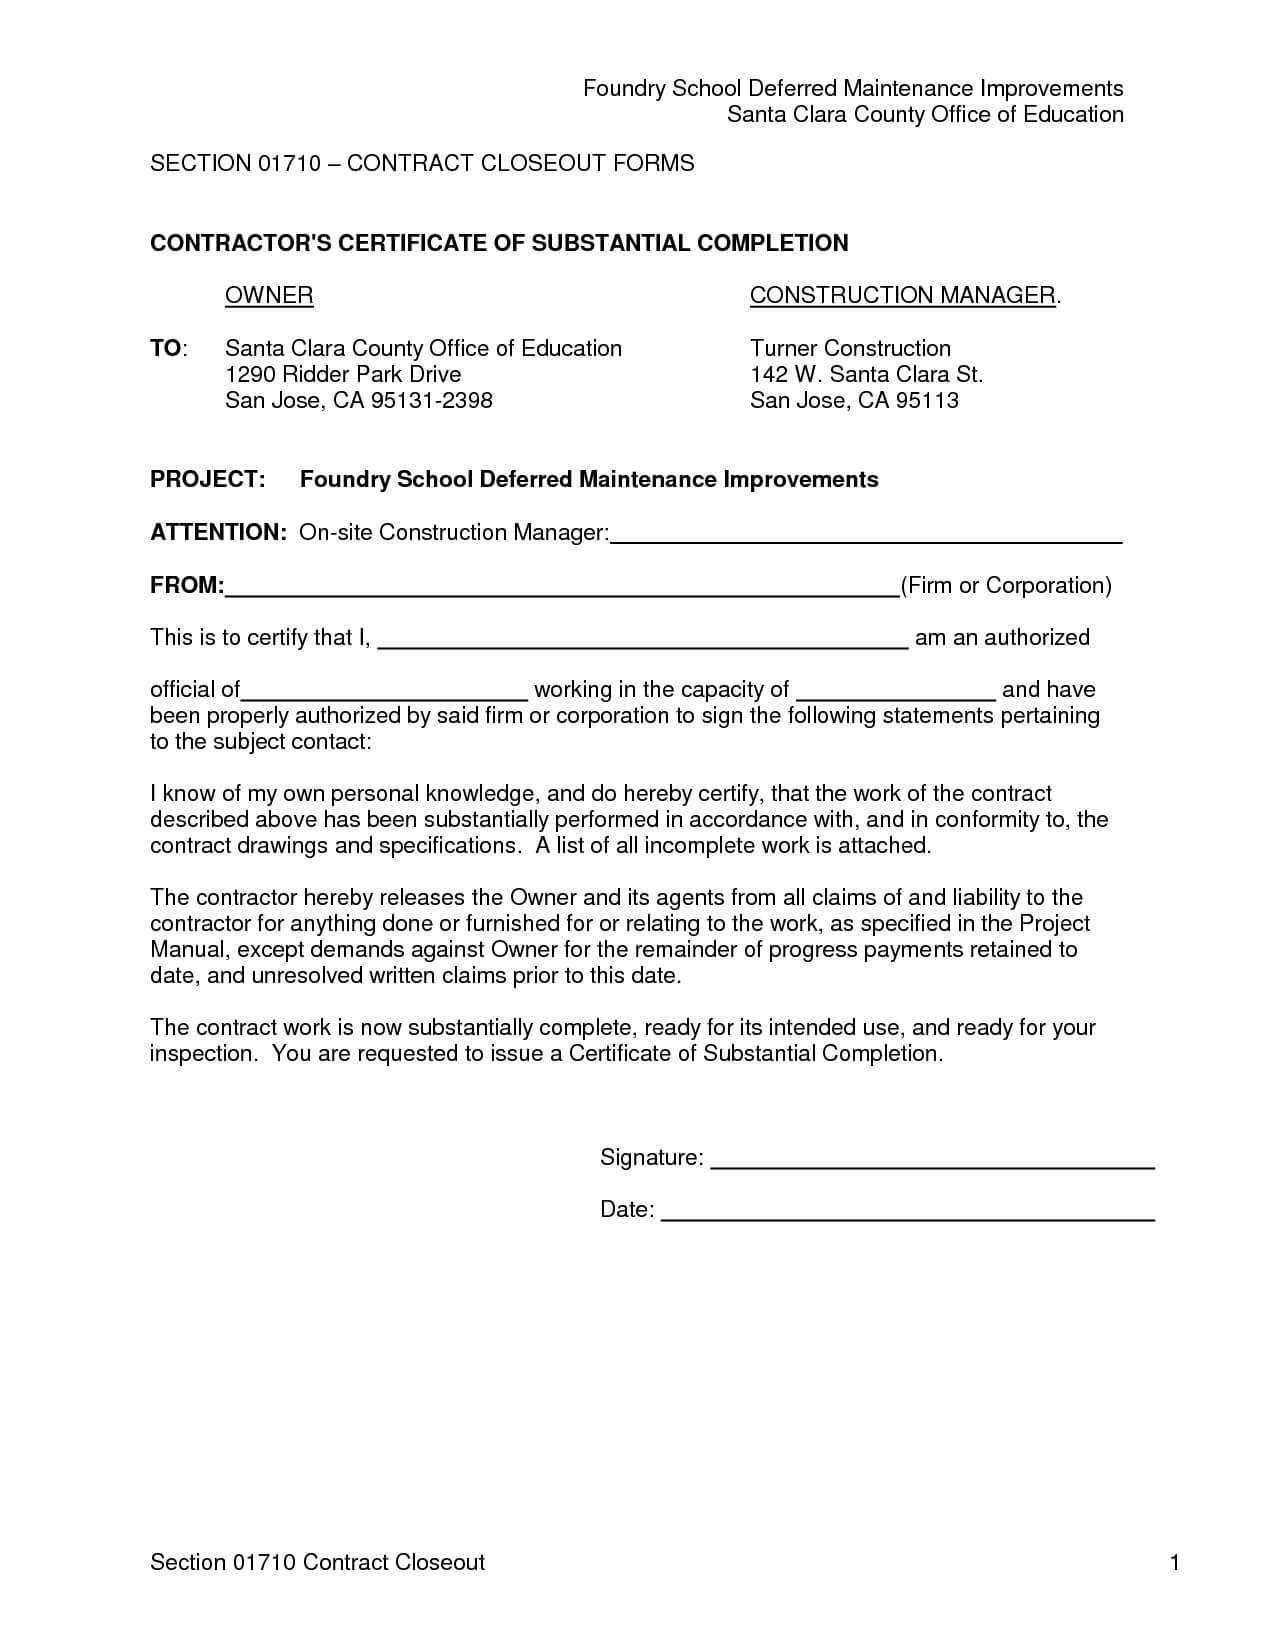 Certificate Of Work Completion Templates 6 – Elsik Blue Cetane Intended For Certificate Of Substantial Completion Template